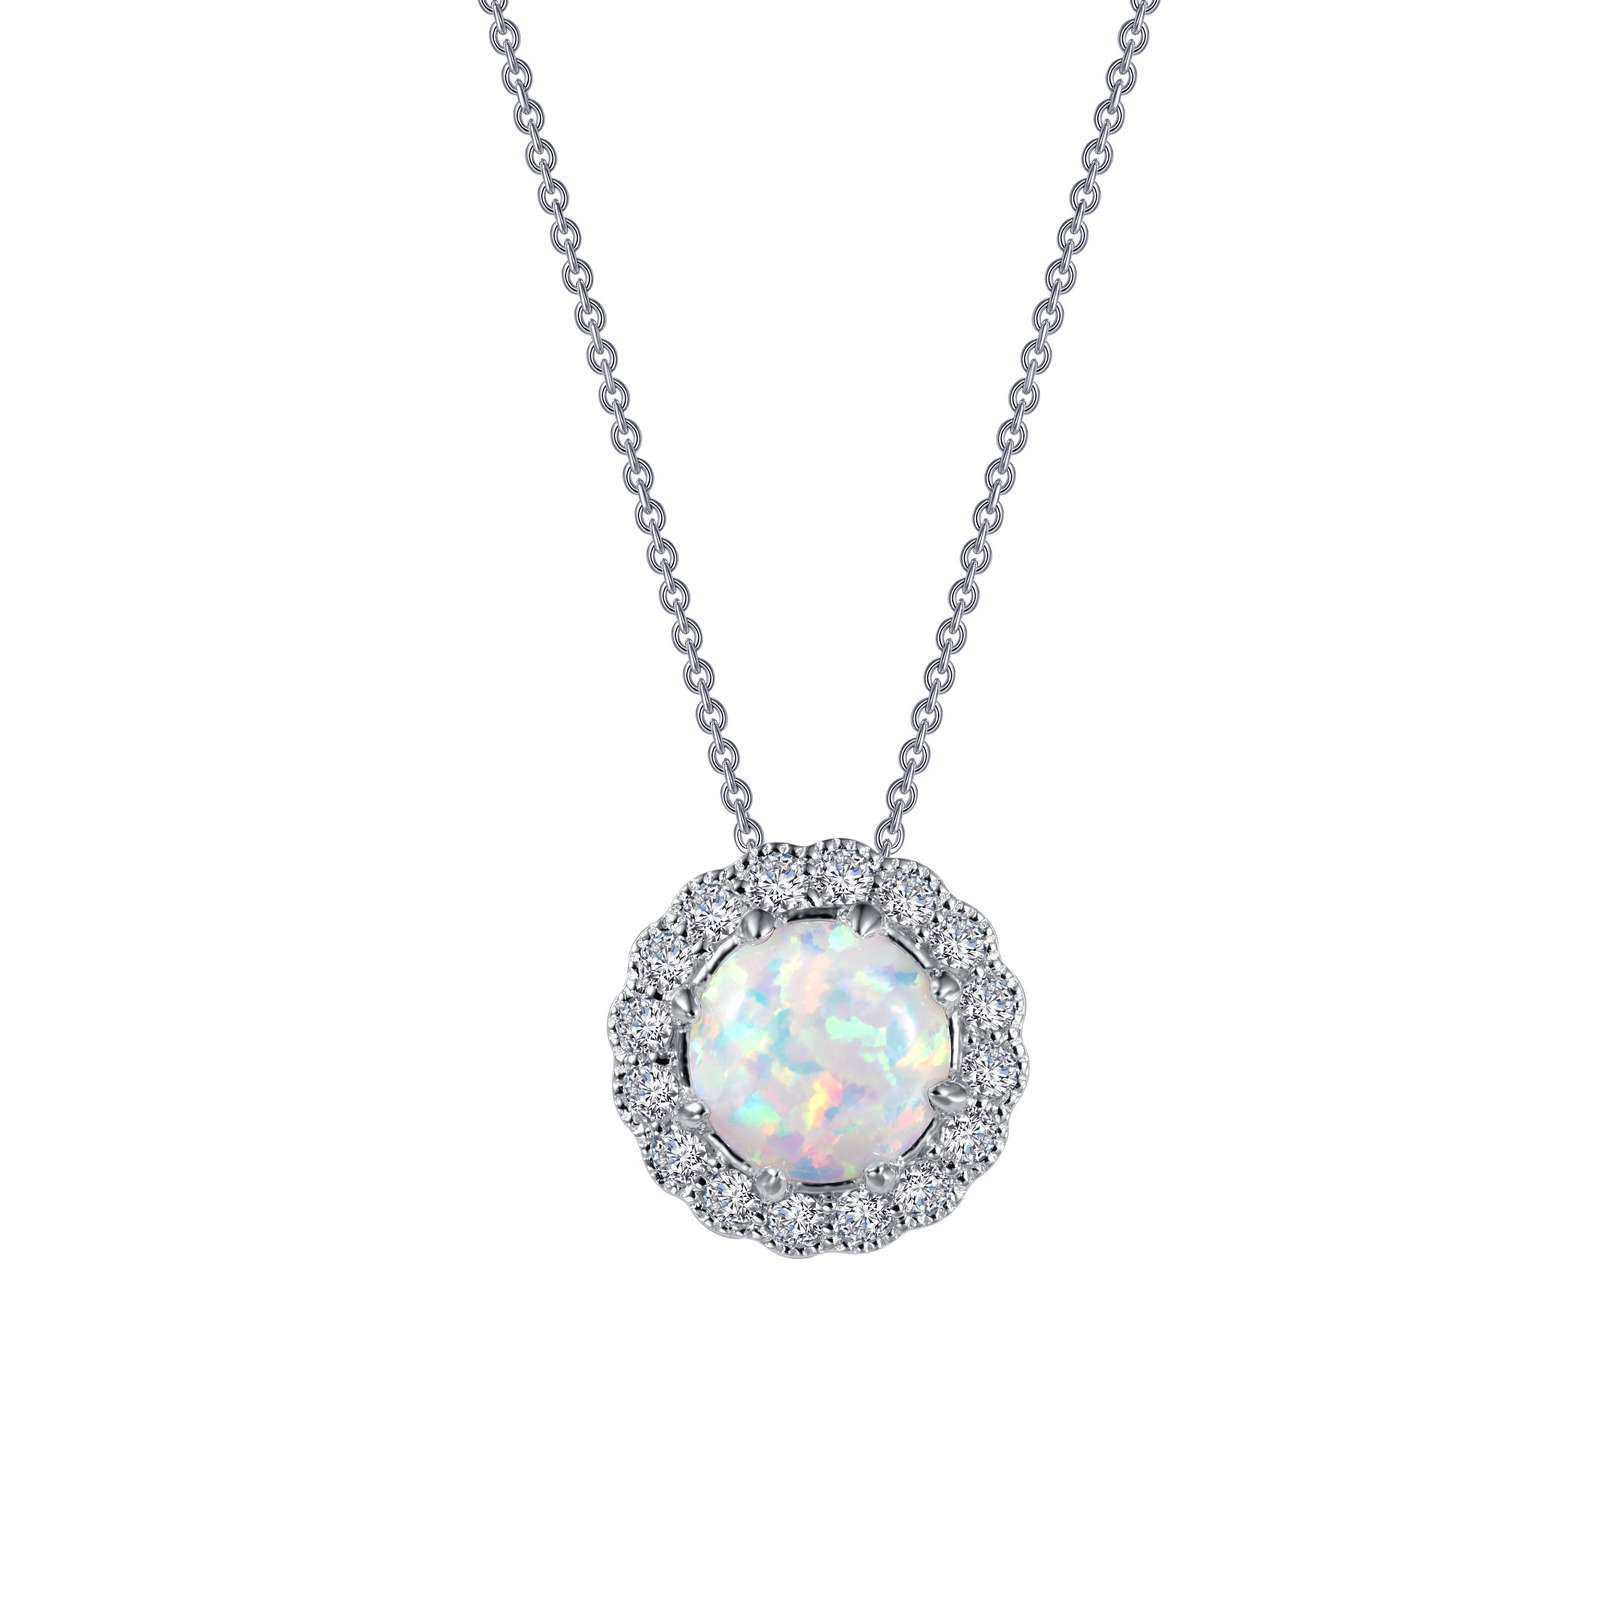 Classic Halo Pendant Necklace - Simple yet elegant. This halo pendant features a simulated opal center stone, surrounded by Lafonn's signature Lassaire simulated diamonds, in sterling silver bonded with platinum. The pendant comes on an adjustable 18